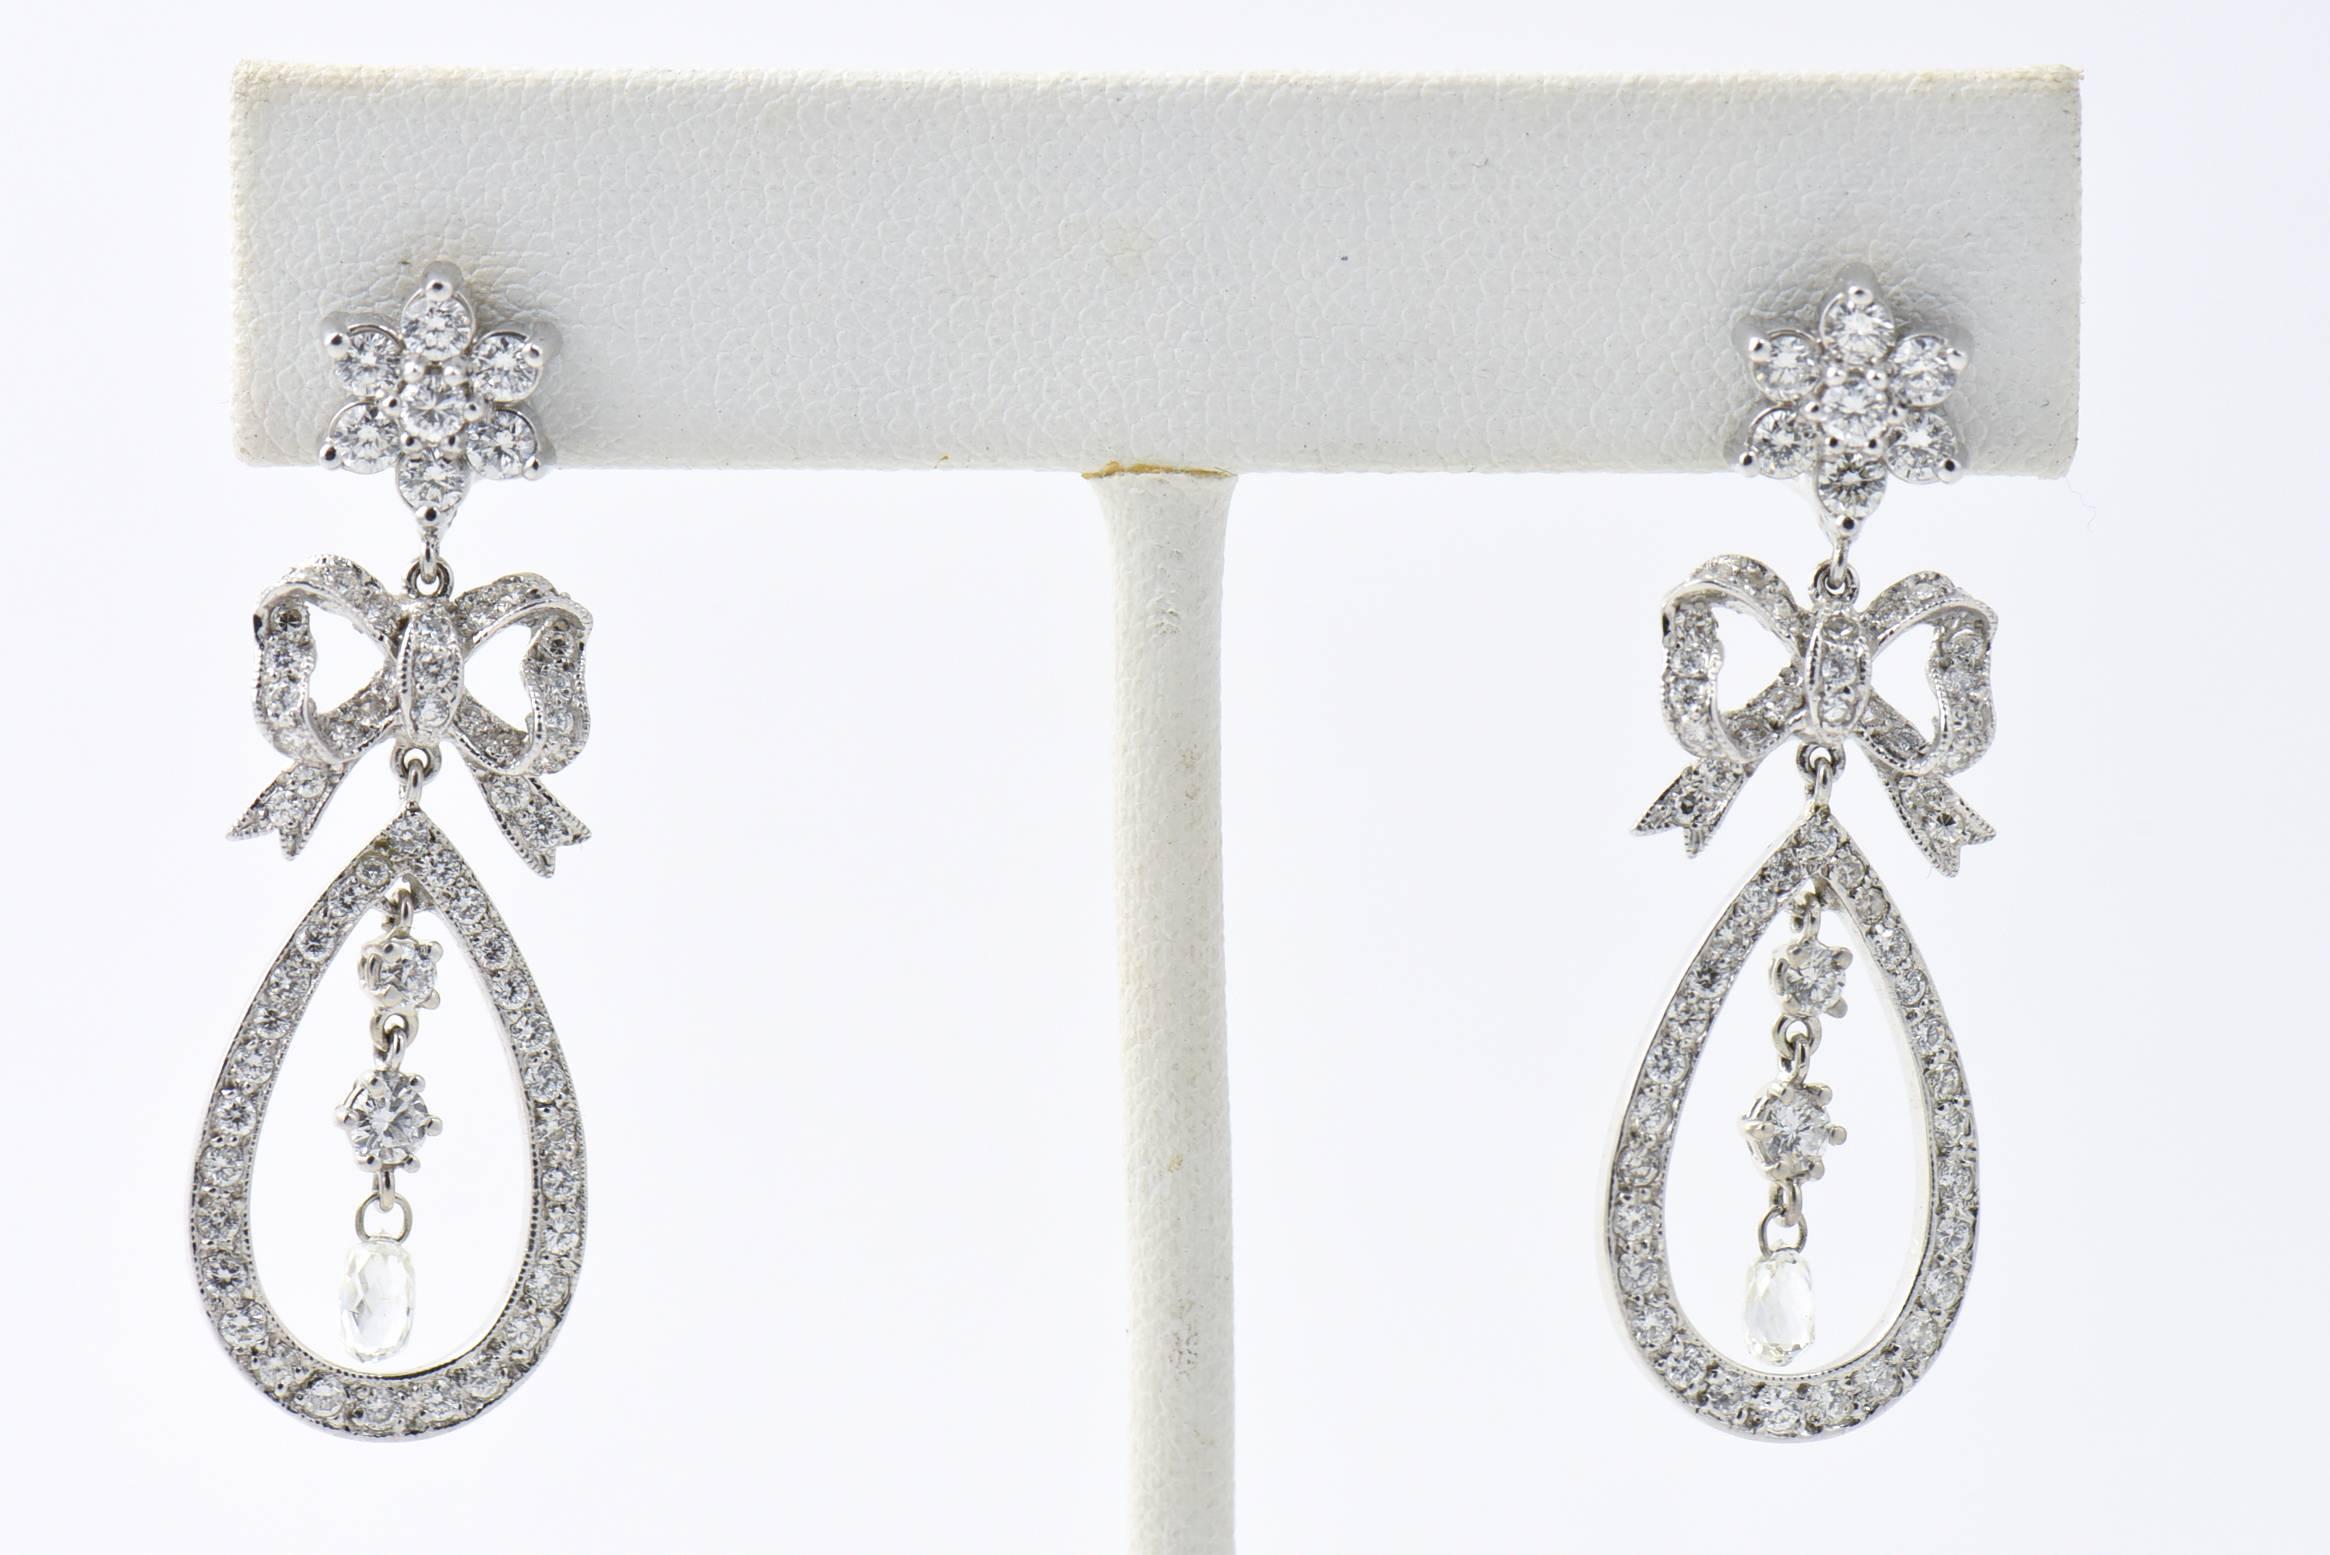 Belle Époque Style Delicate Diamond Bow and Flower Drop 18k white gold earrings containing 1.92 carats in round diamonds and .61 carats in  rough cut briollets for an approximate total weight of 2.53.  

These earrings are perfect for a bride.